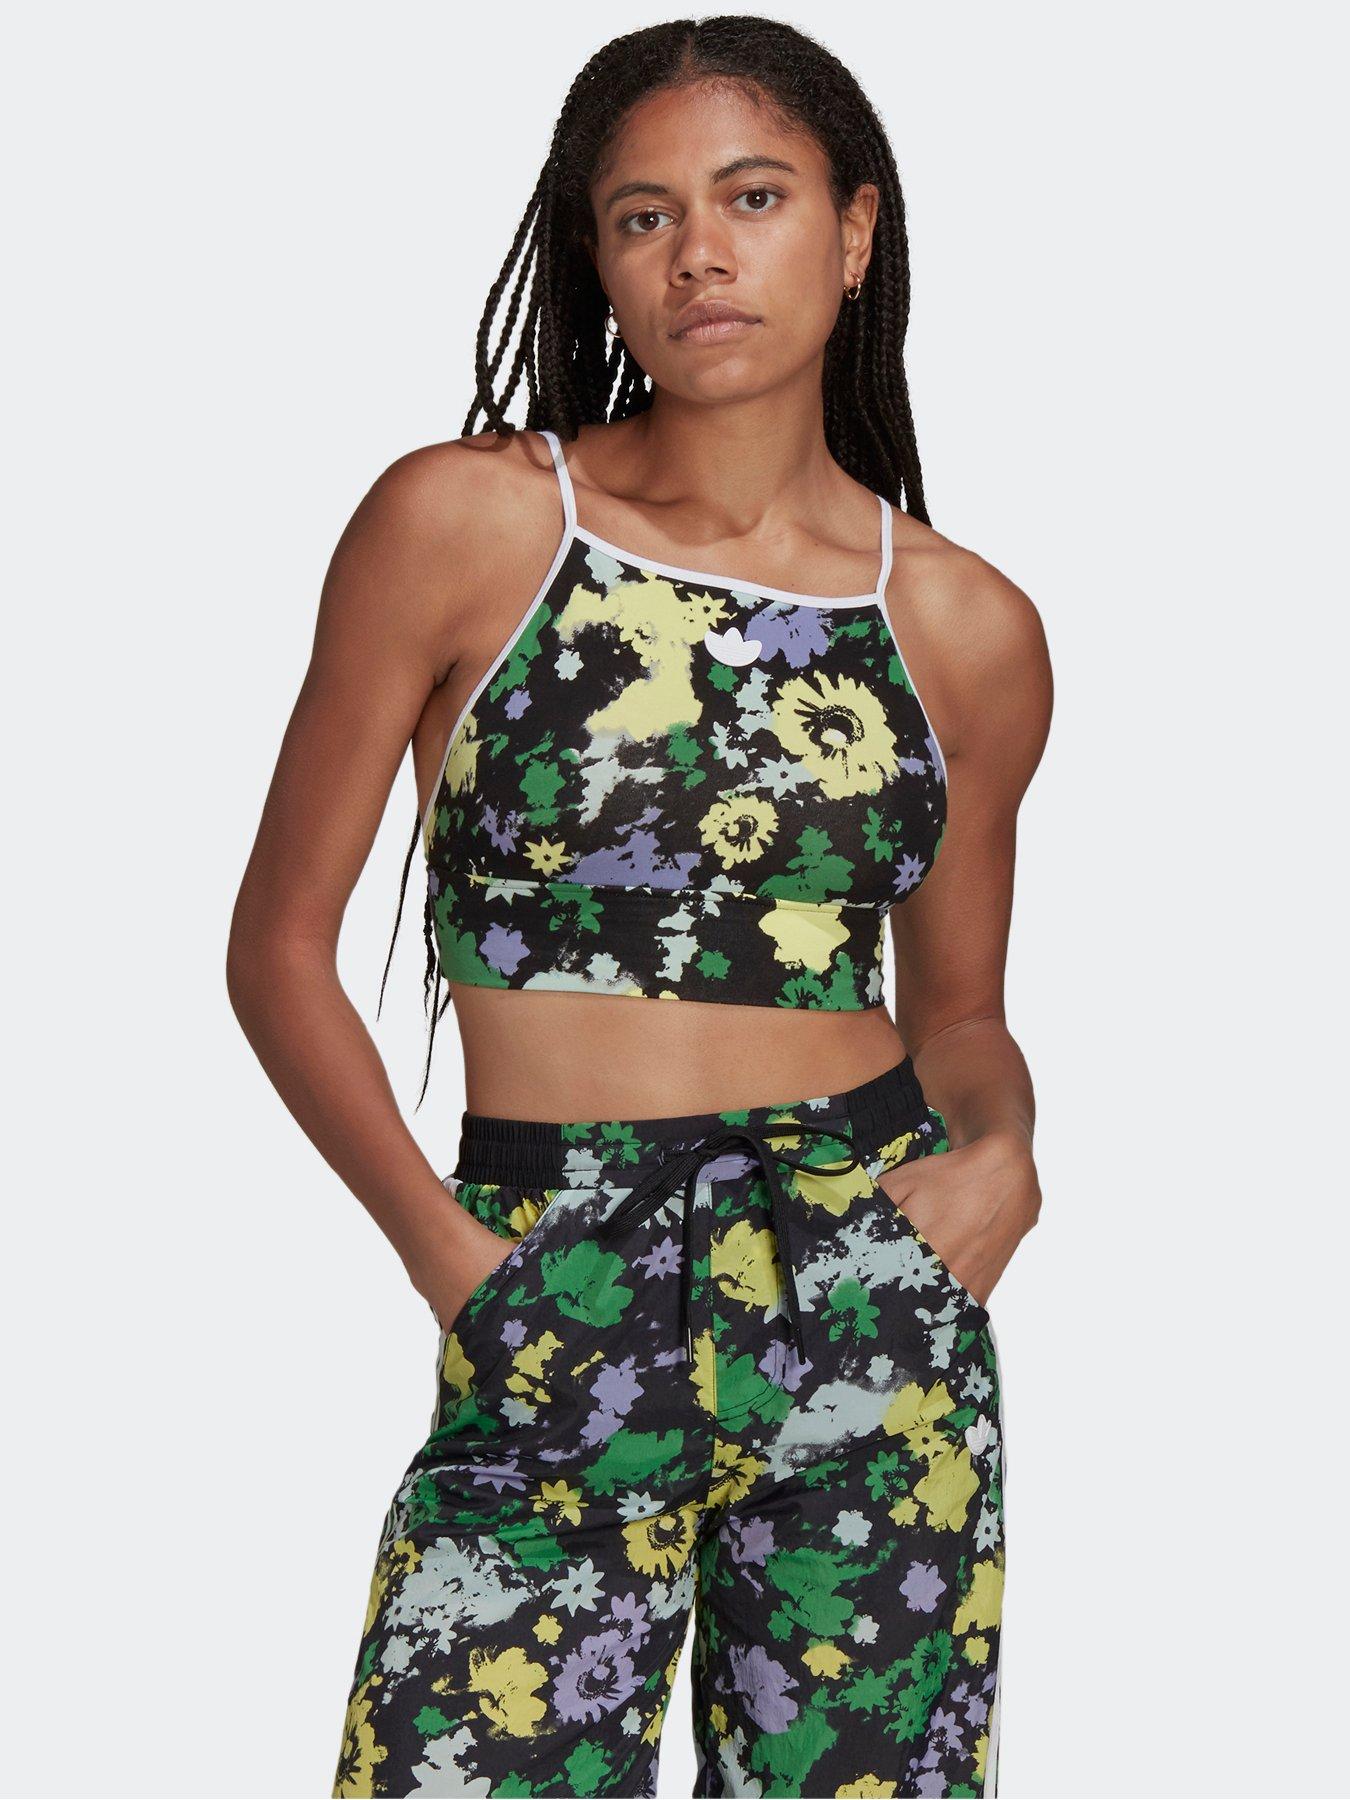  Floral Sports Bra Long-sleeve Top